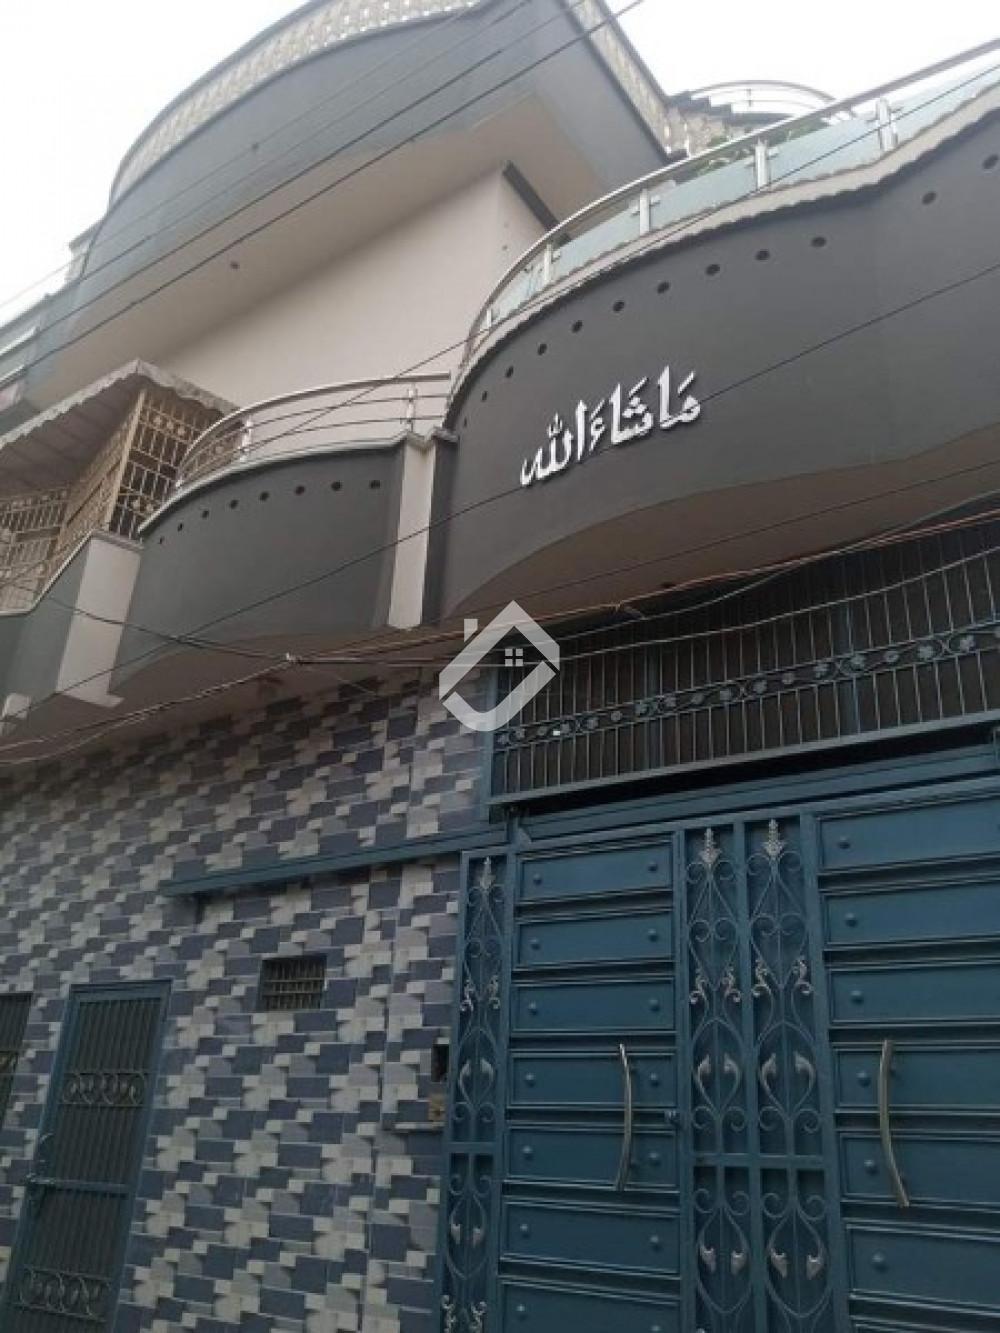 View  8 Marla House For Sale In Bhawal Valley in Bhawal Valley, Sargodha